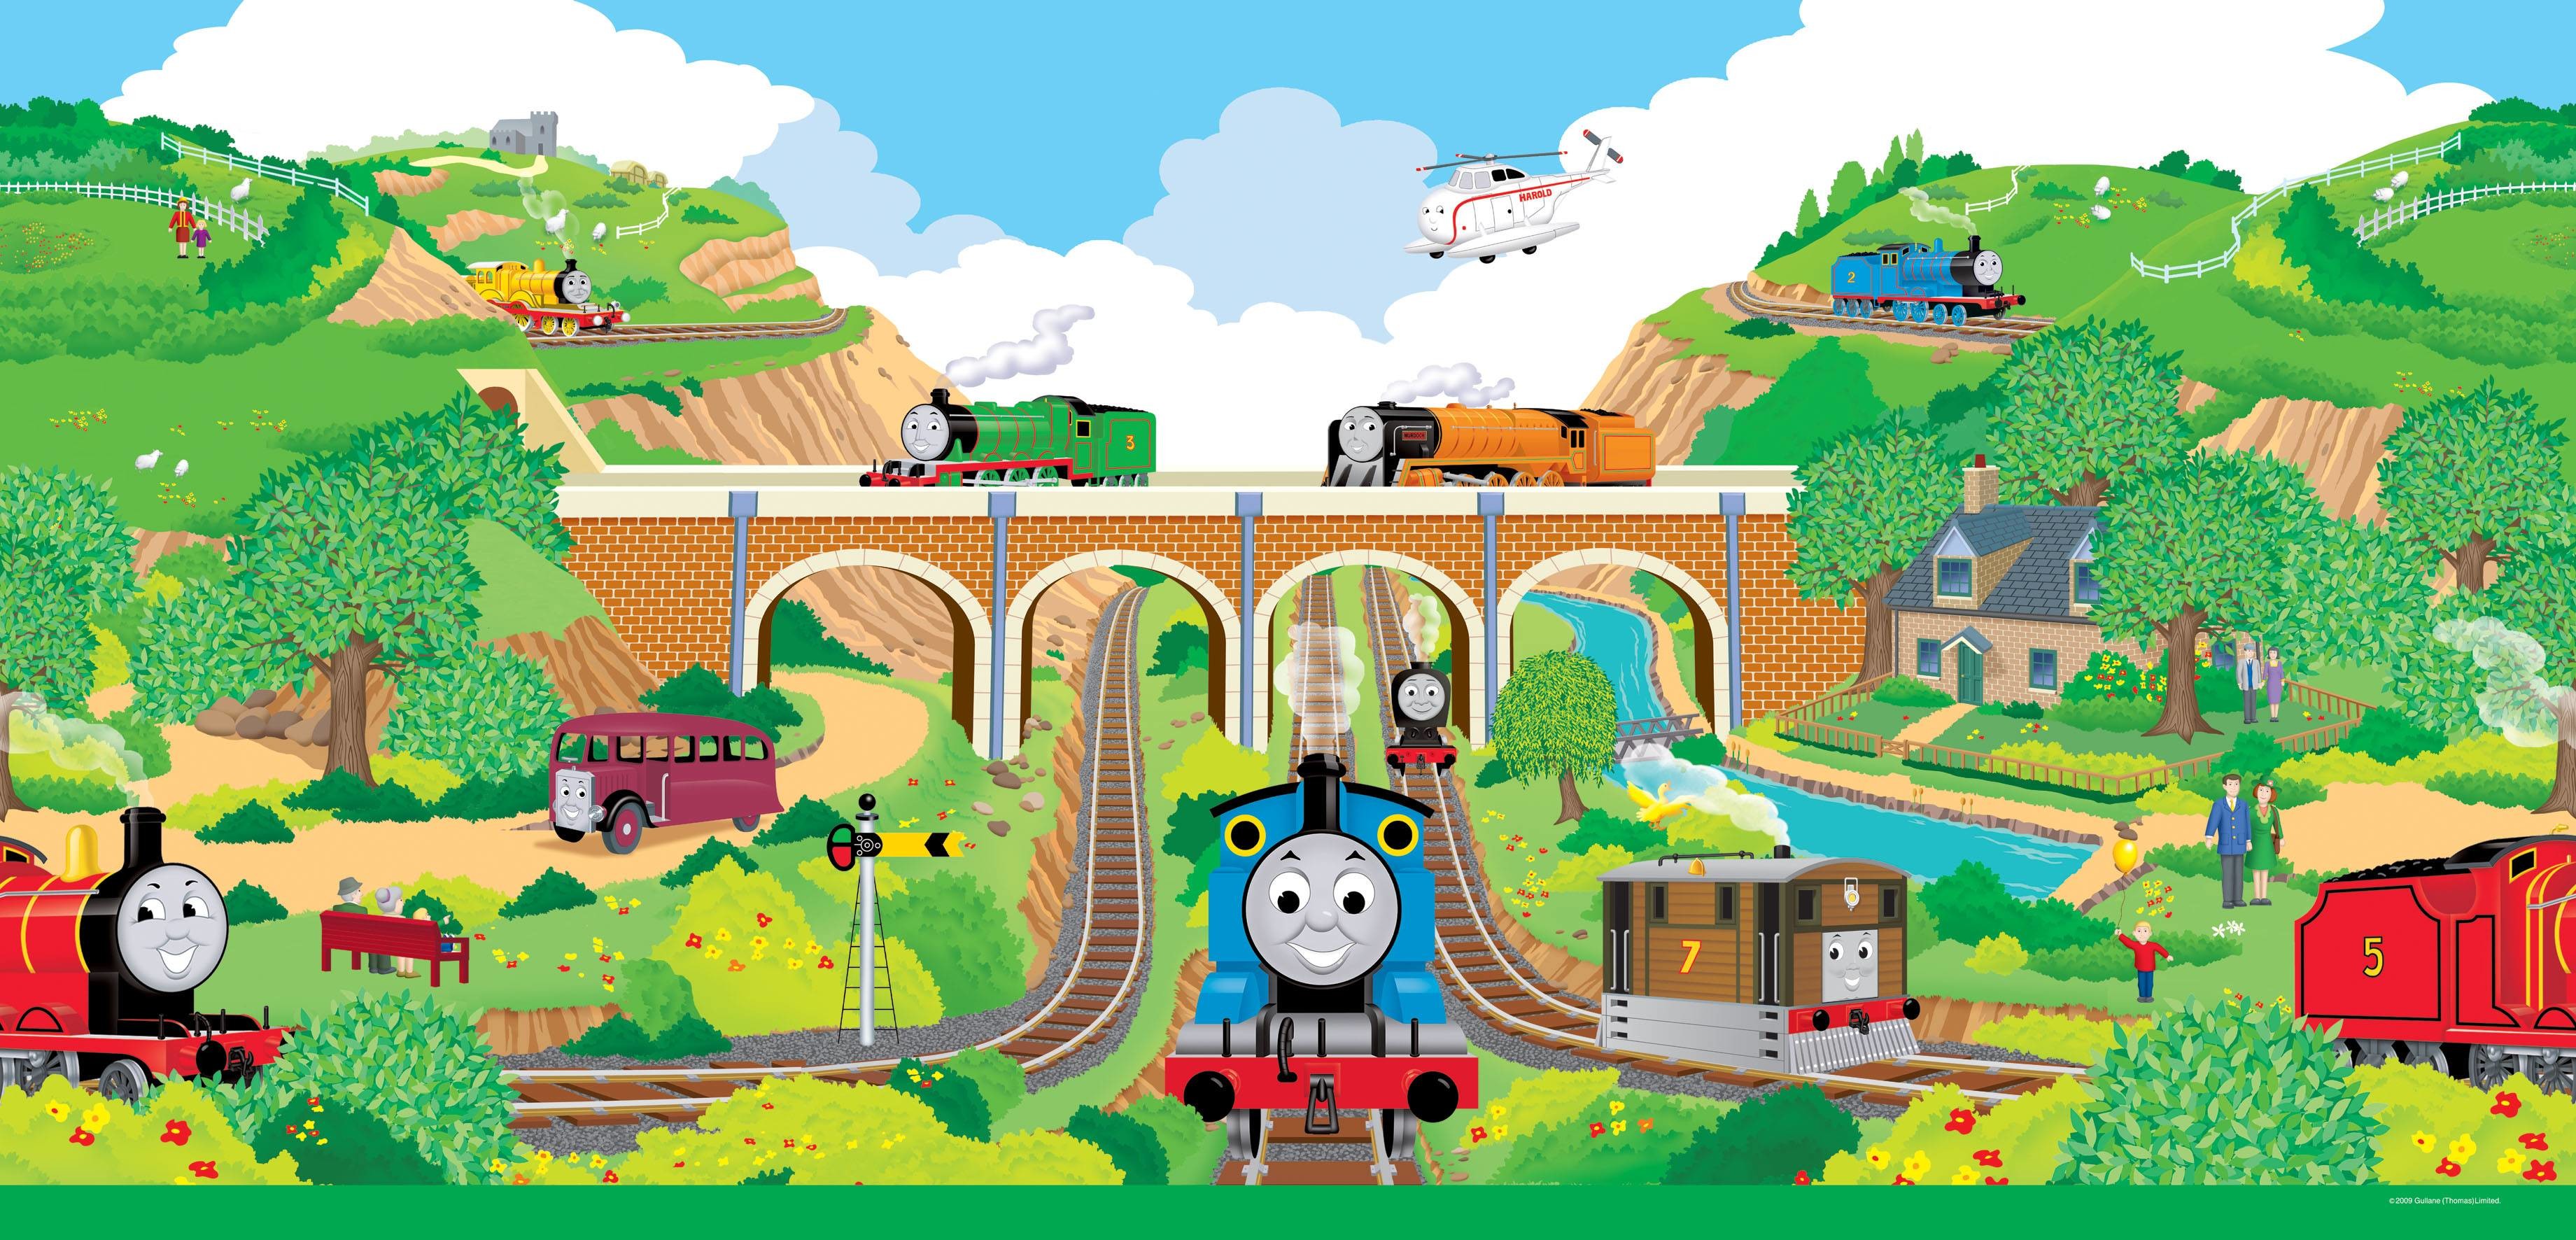 3681x1772 Thomas The Tank Engine Wallpaper - Viewing Gallery